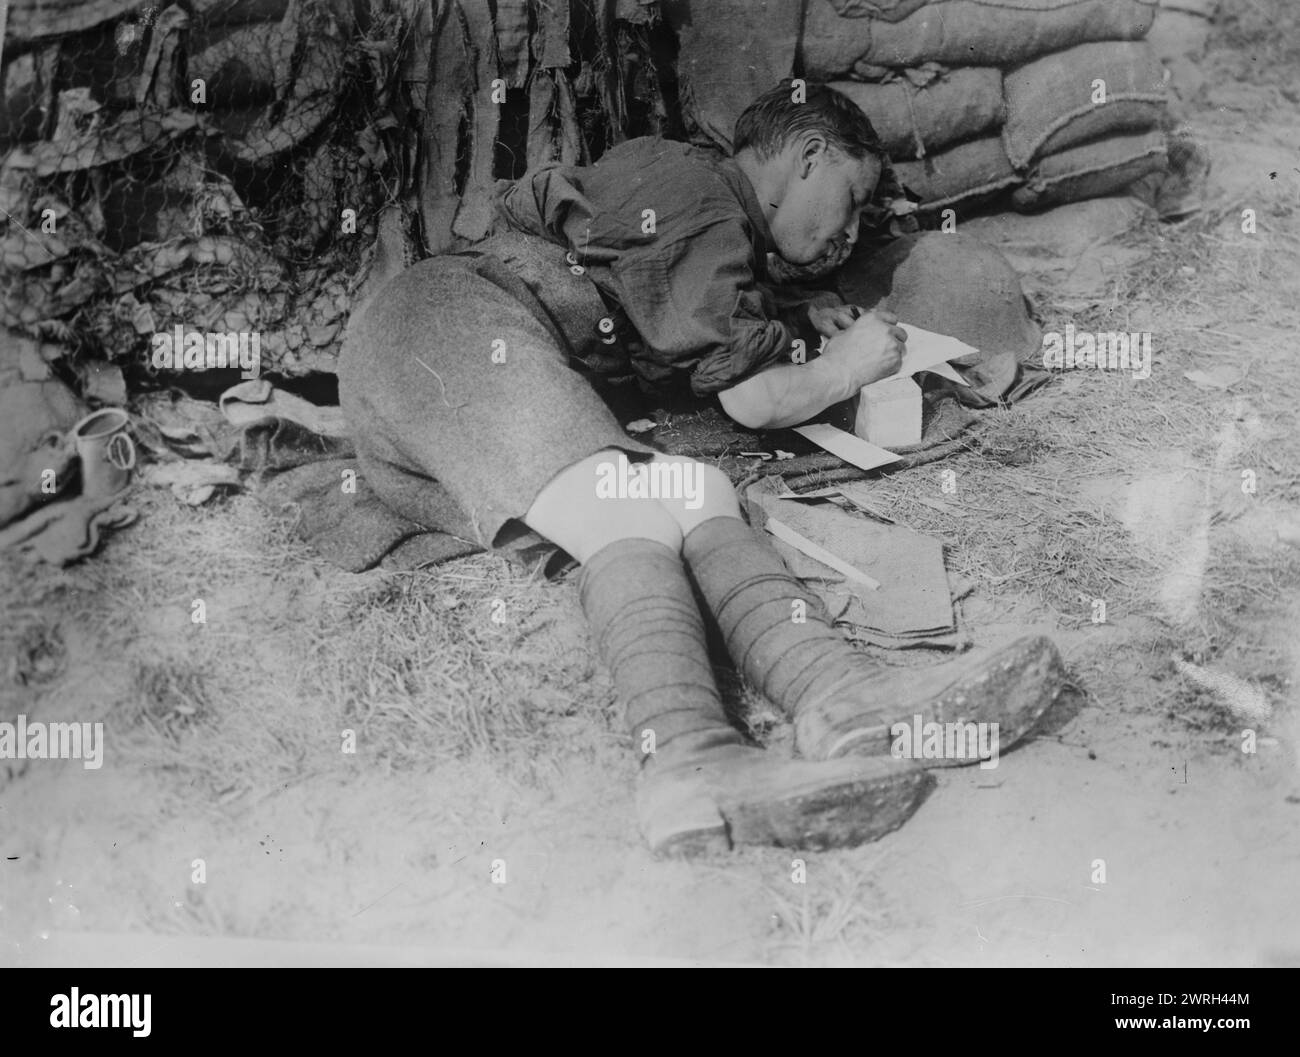 Tommy writing home after battle,  11 Jun 1917. A British officer, lying on the ground in a captured German trench in Oostaverne Wood, Belgium, writing a letter, during the Battle of Messines offensive, during World War I. Stock Photo